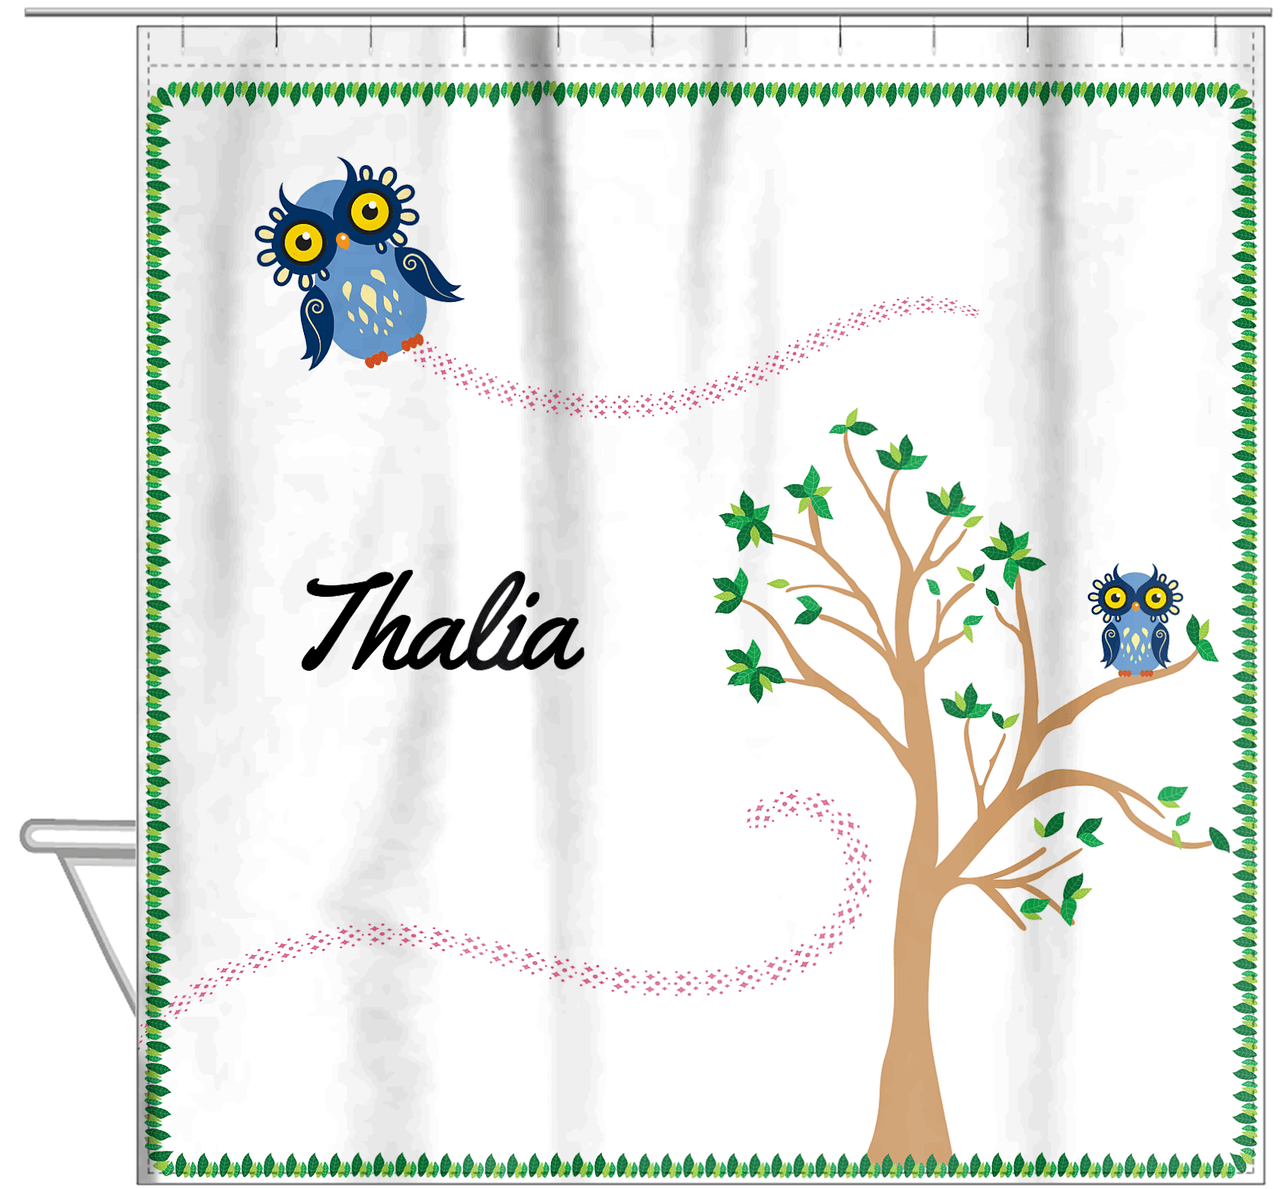 Personalized Owl Shower Curtain VII - Owl 01 - White Background - Hanging View